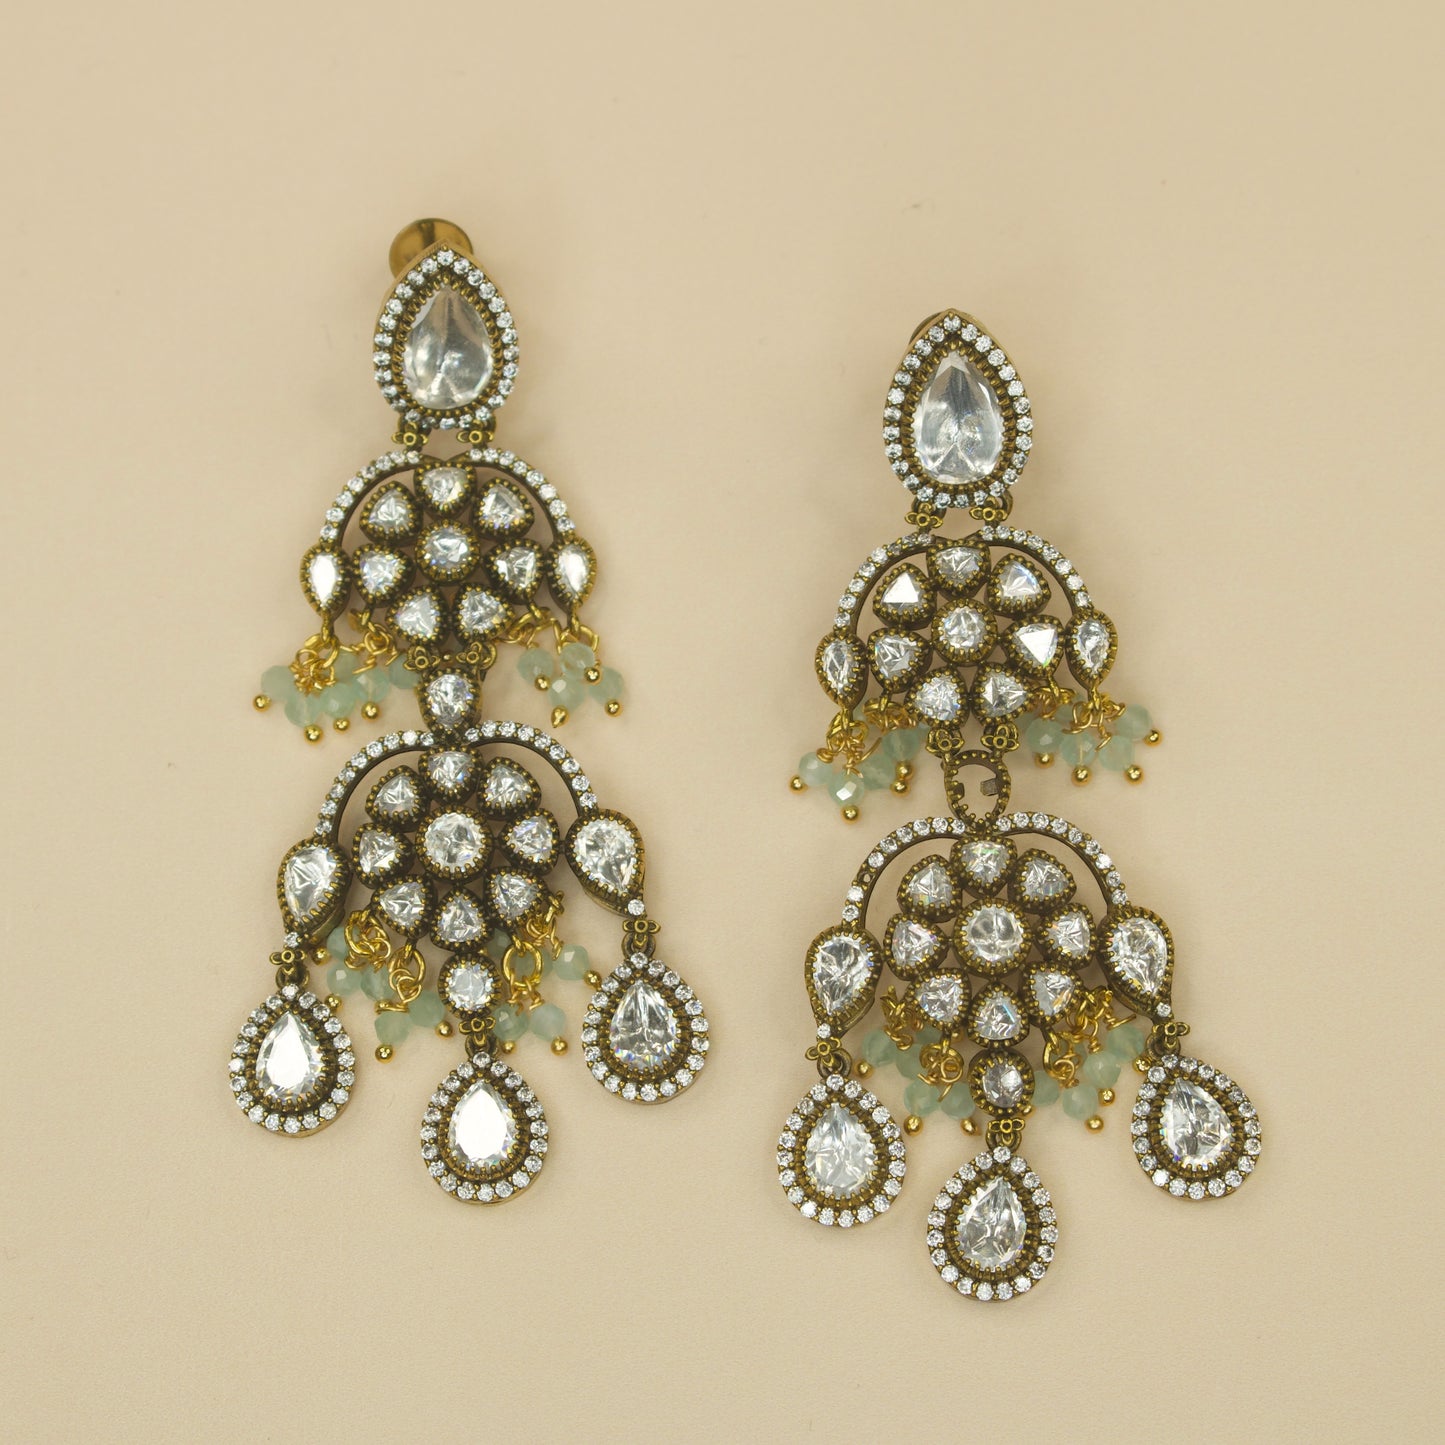 Designer Victorian Floral Earrings with screw-back